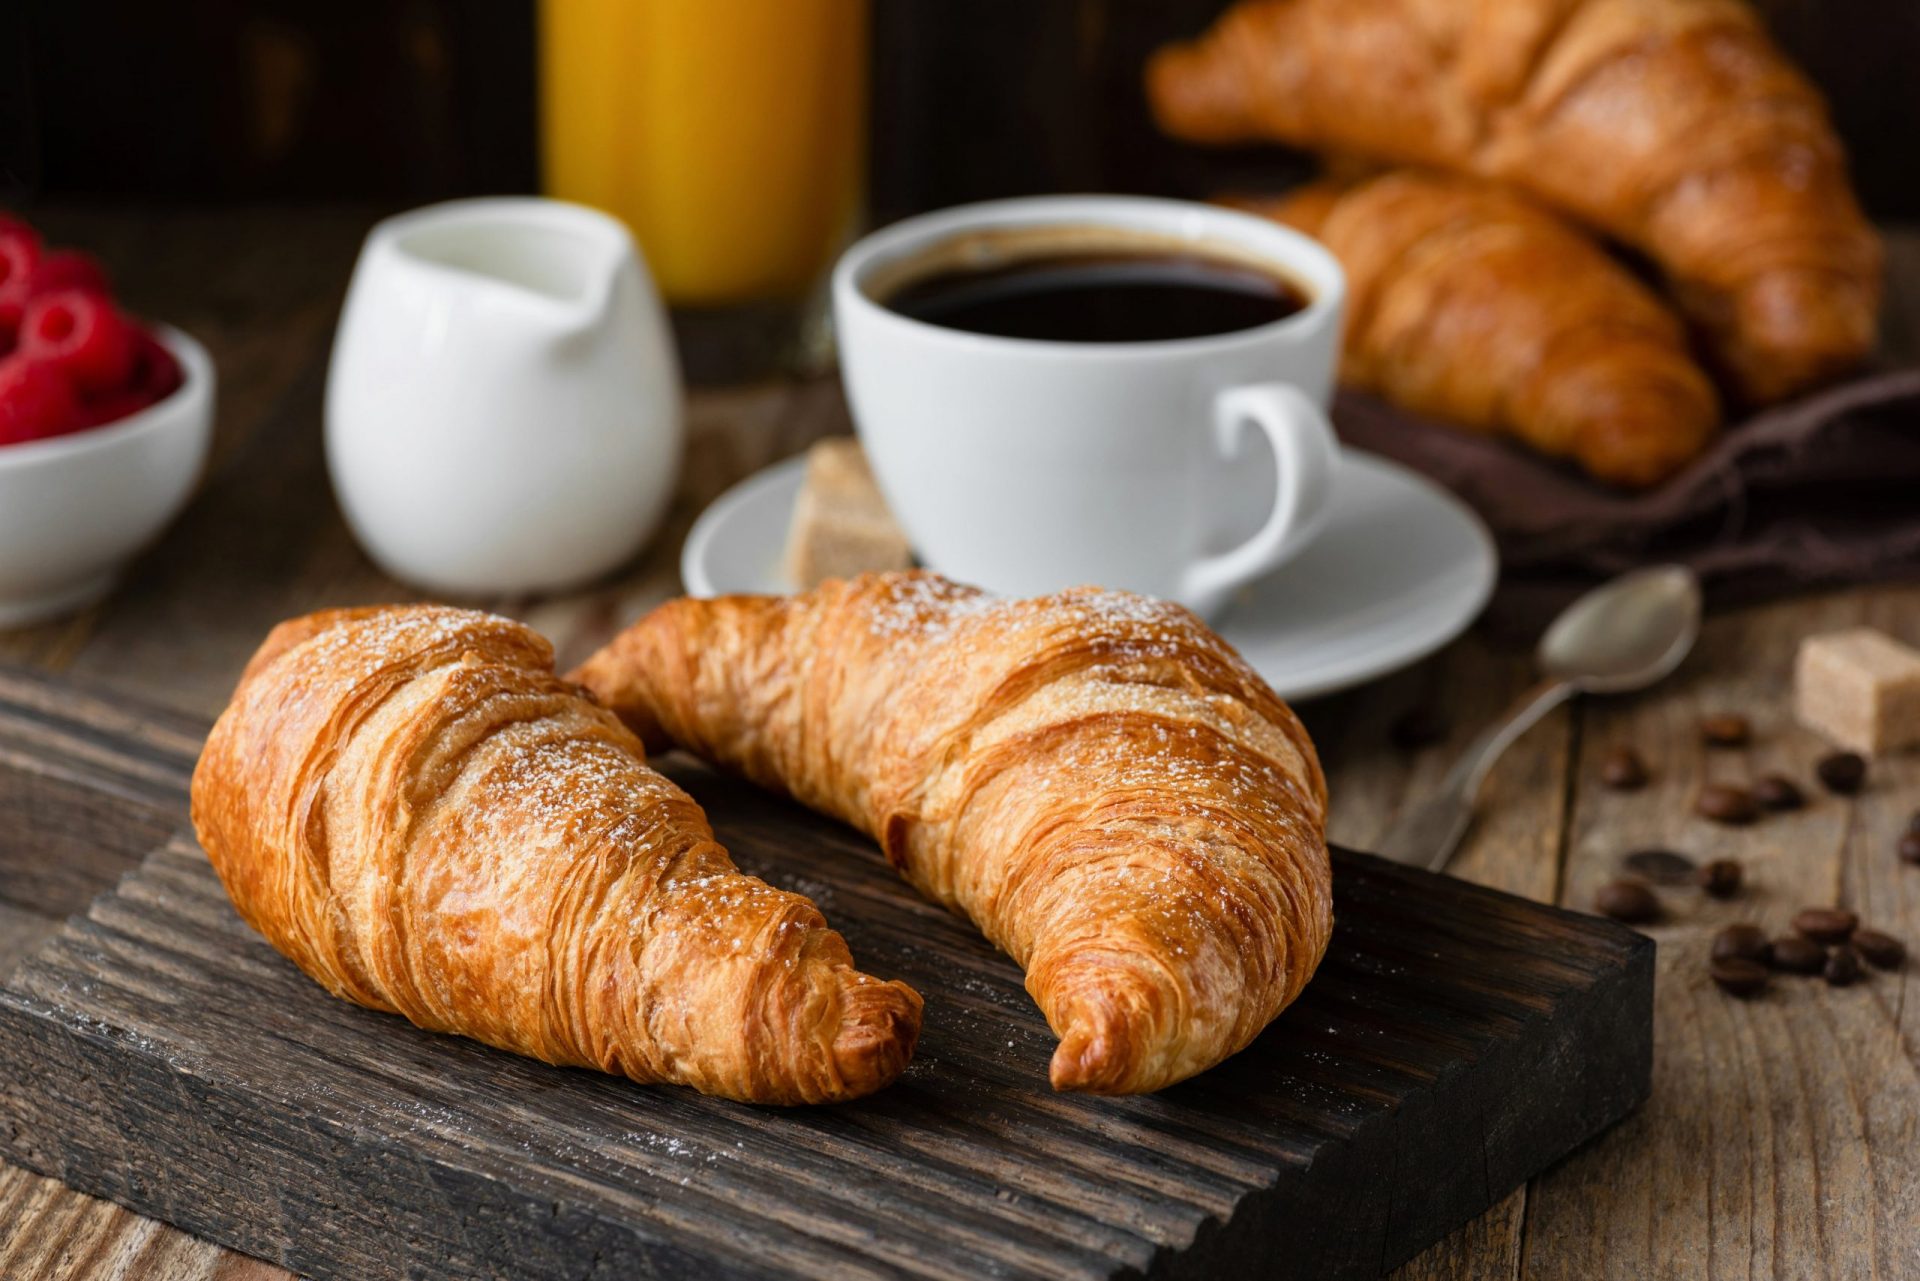 Two croissants on a wooden board alongside a cup of coffee, cream, and raspberries